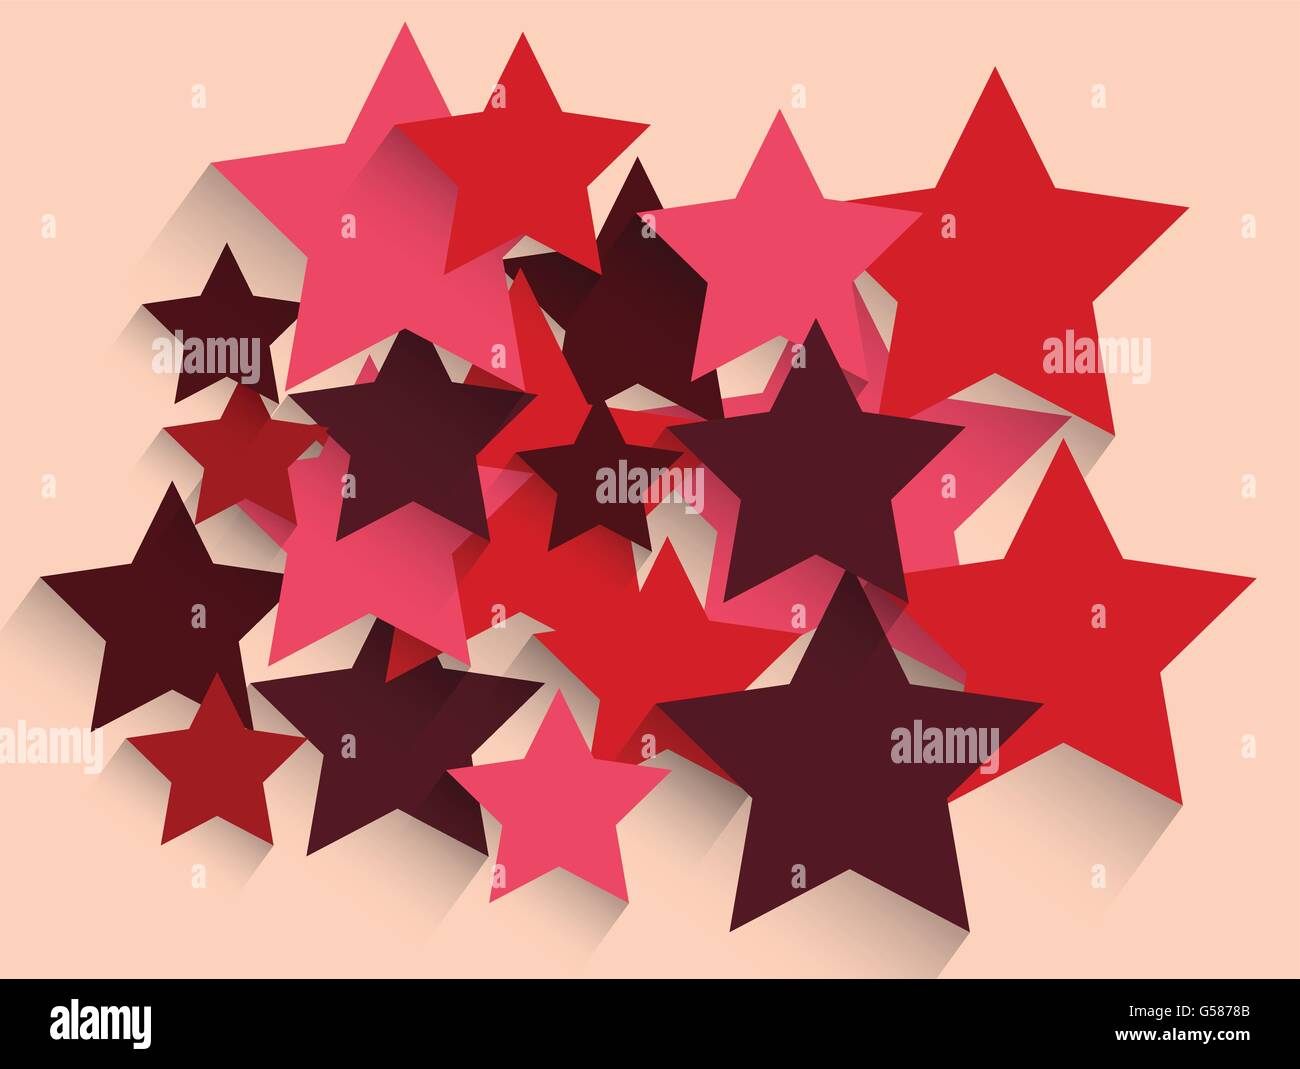 Abstract red star background creativo illustrazione vettoriale Illustrazione Vettoriale